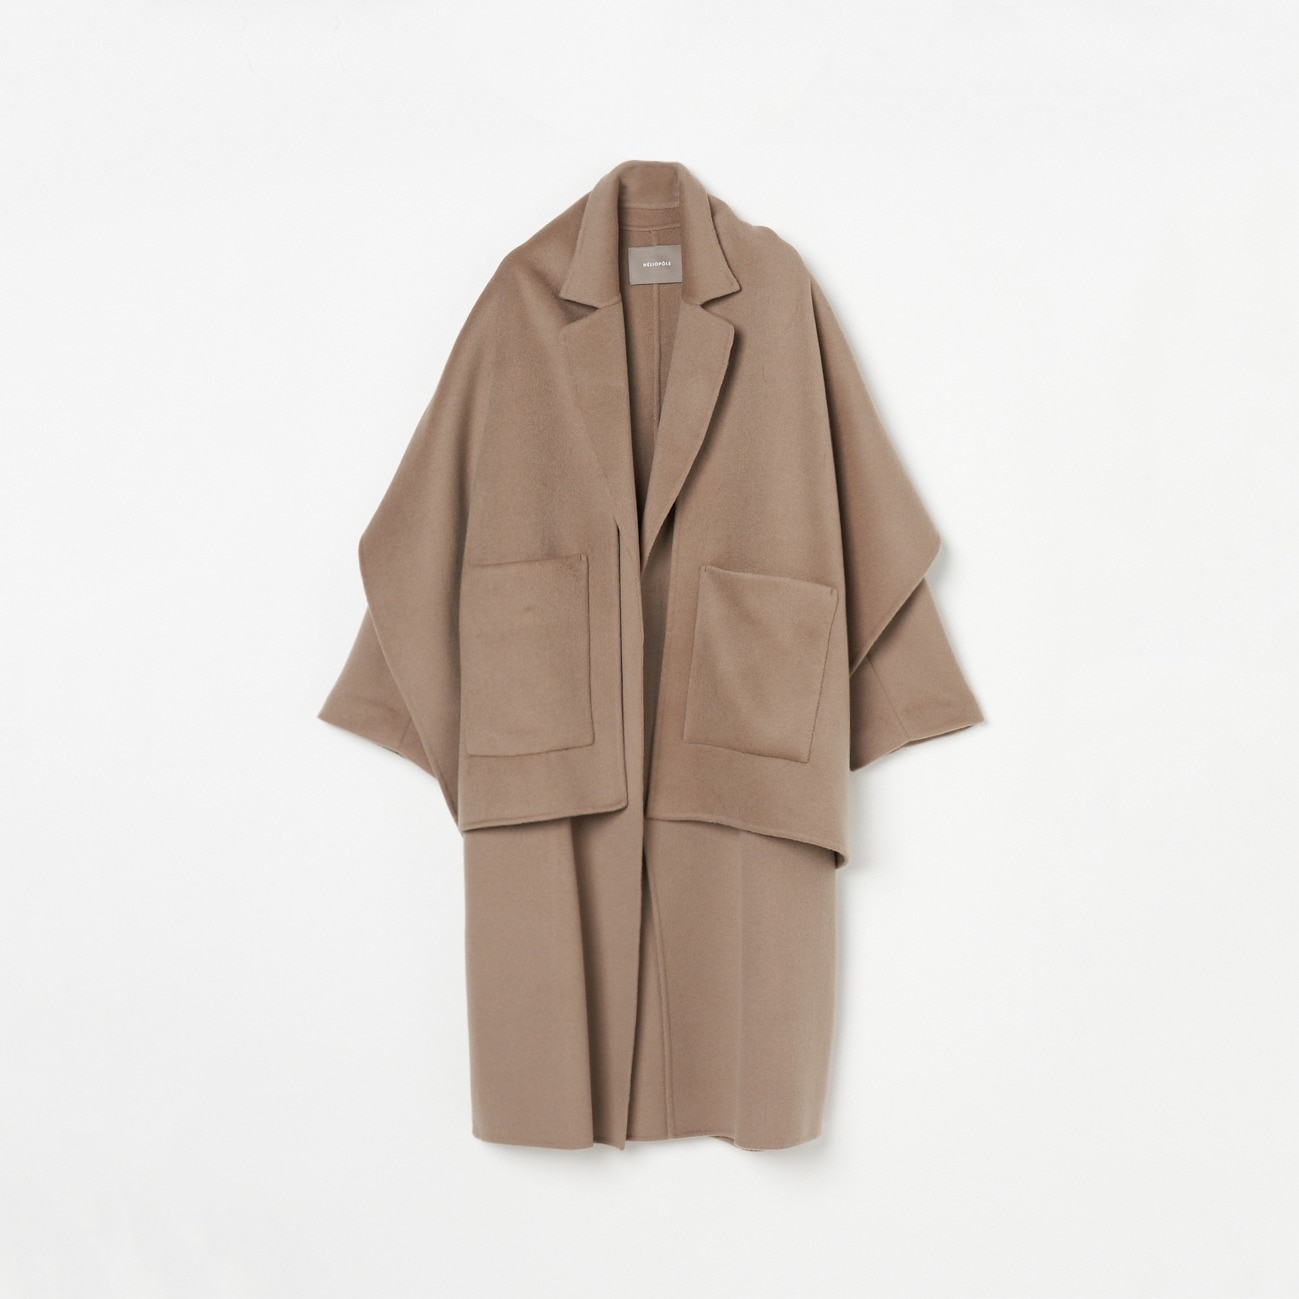 HELIOPOLE DOUBLE FACE COAT WITH STOLE|HELIOPOLE(エリオポール)の 